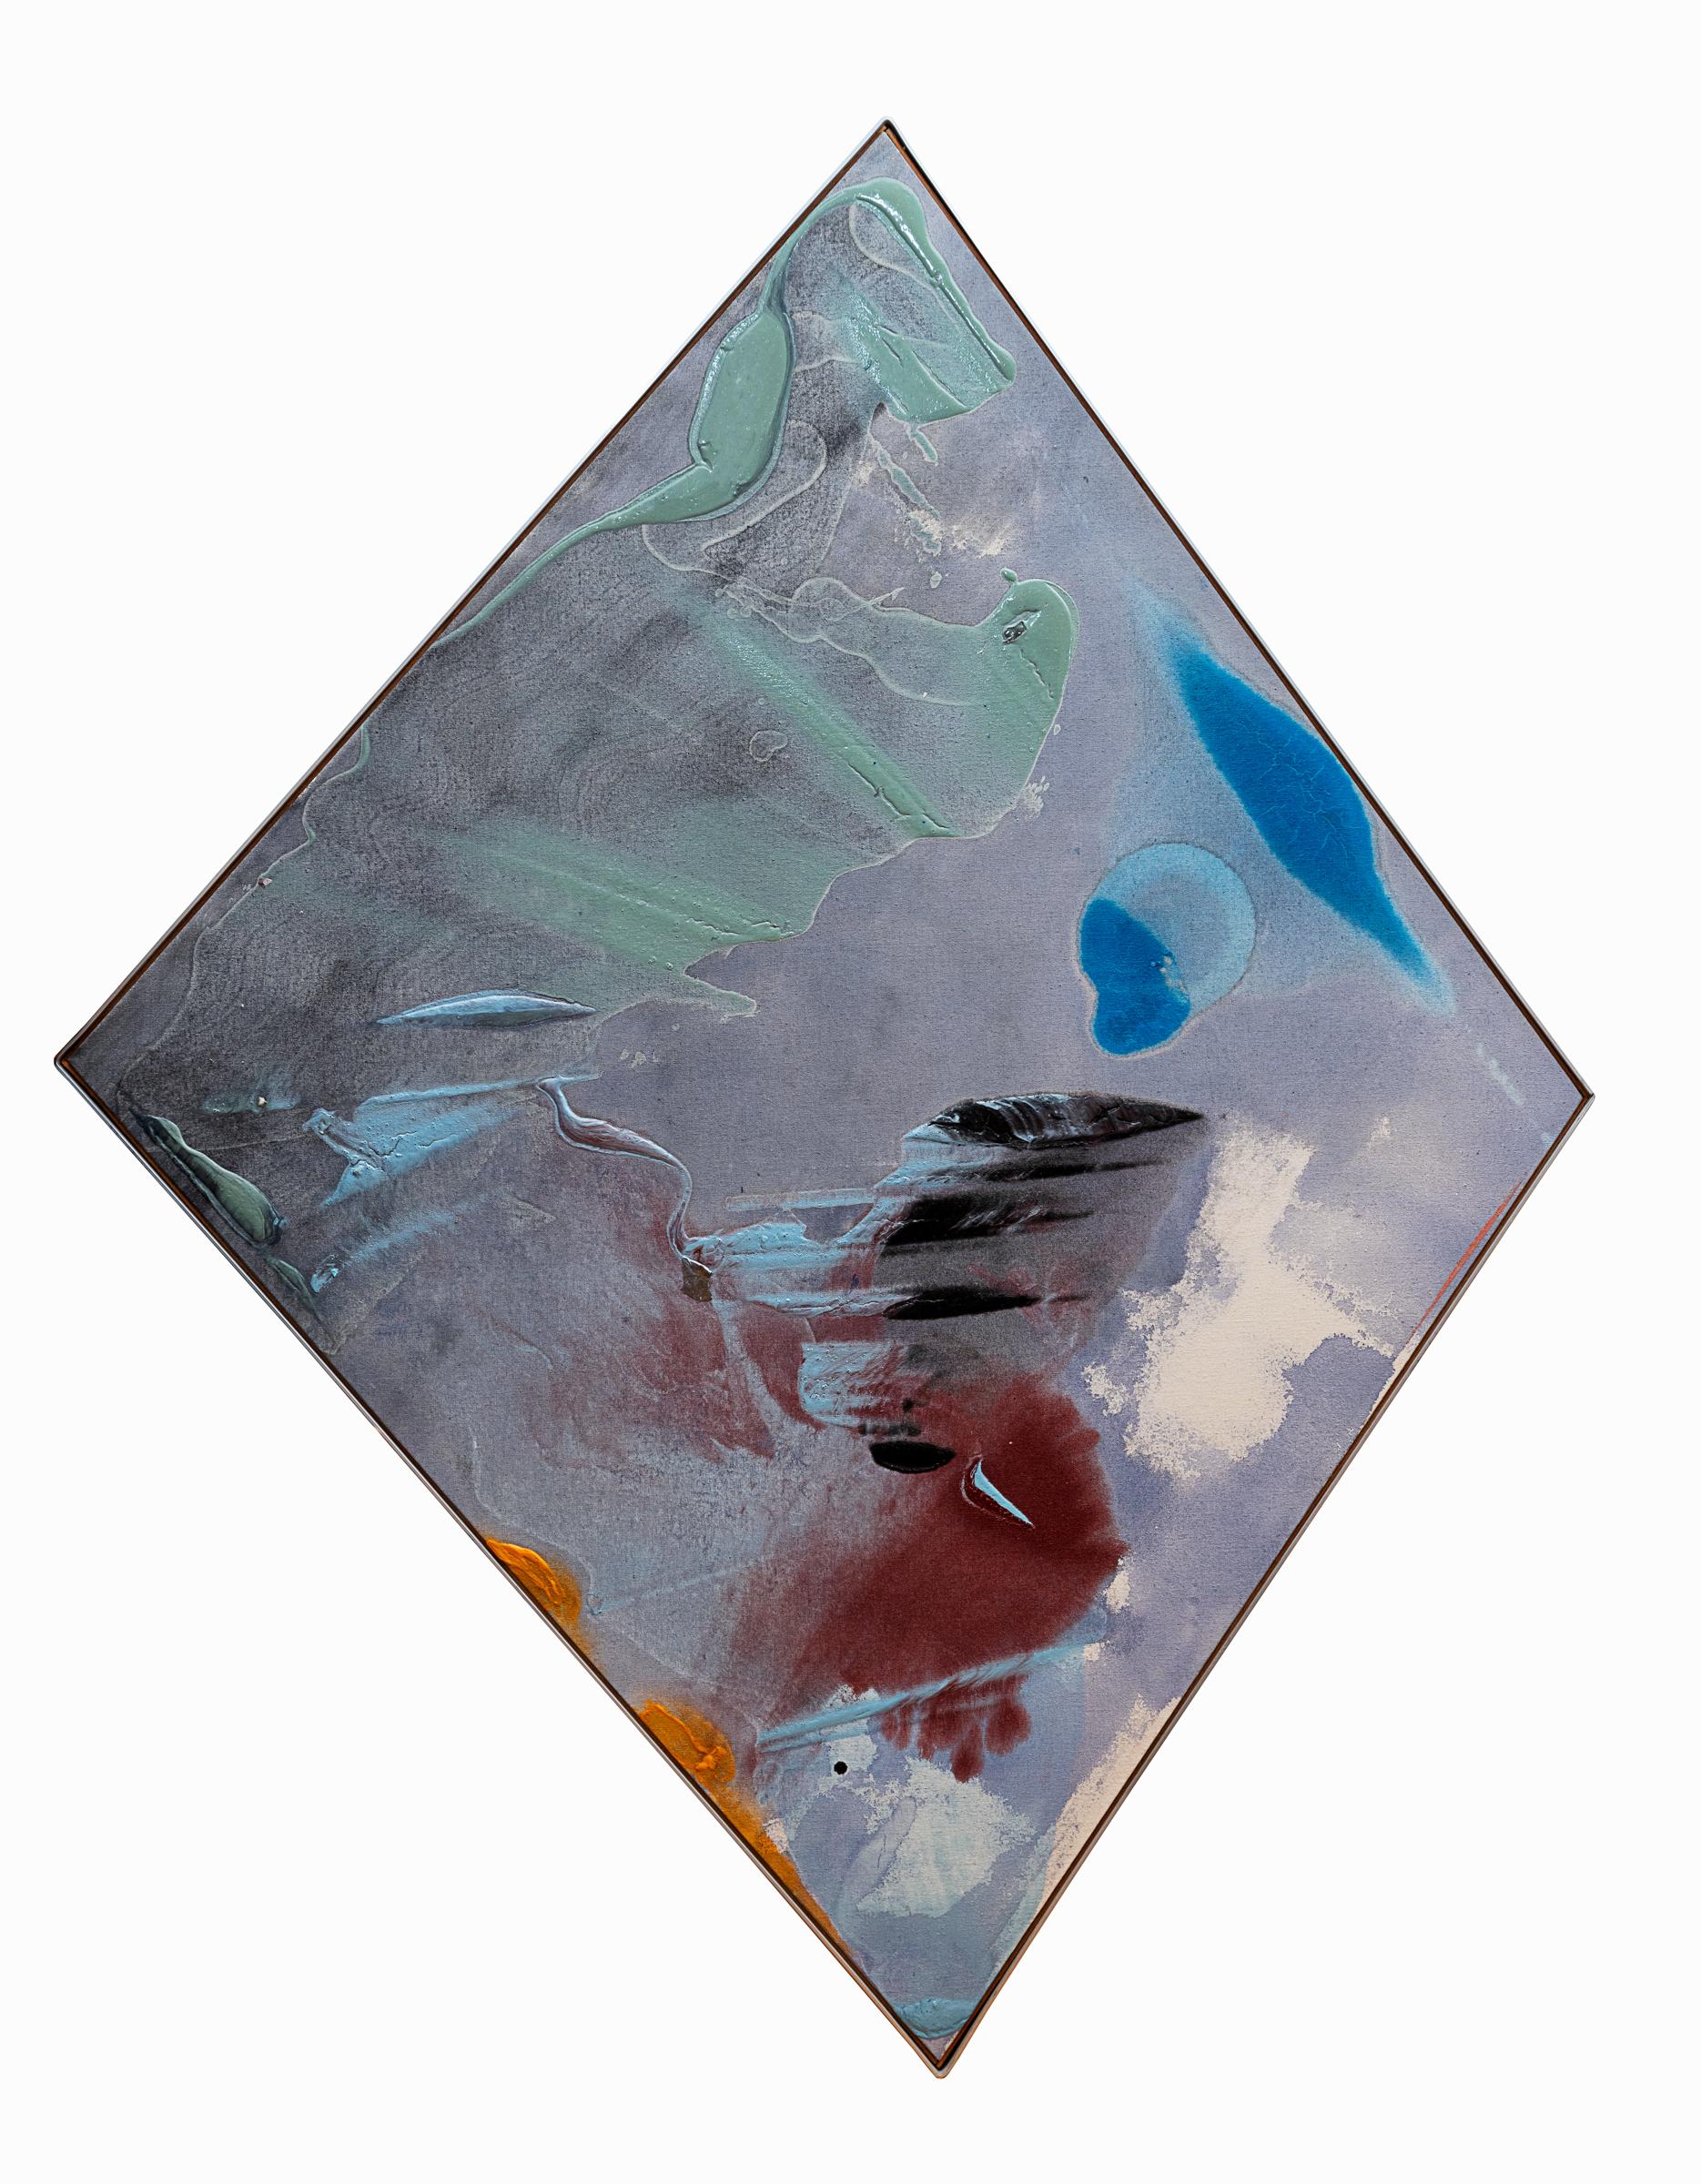 Untitled - Diamond Shaped Abstract Painting - Blue Green Black Orange Red White 